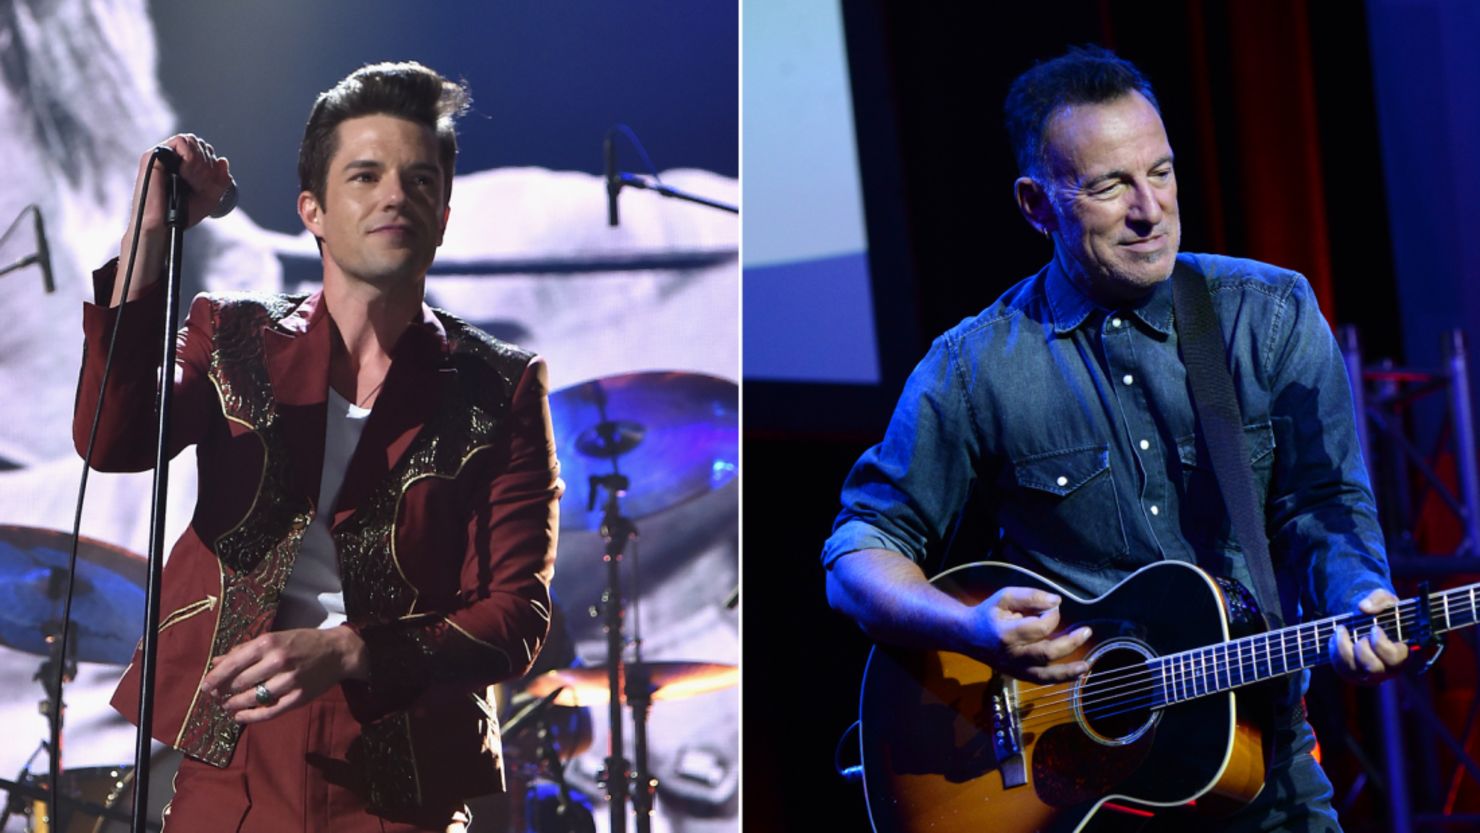 Brandon Flowers, the frontman of The Killers, told Rolling Stone that Bruce Springsteen has greatly influenced him as a musician.